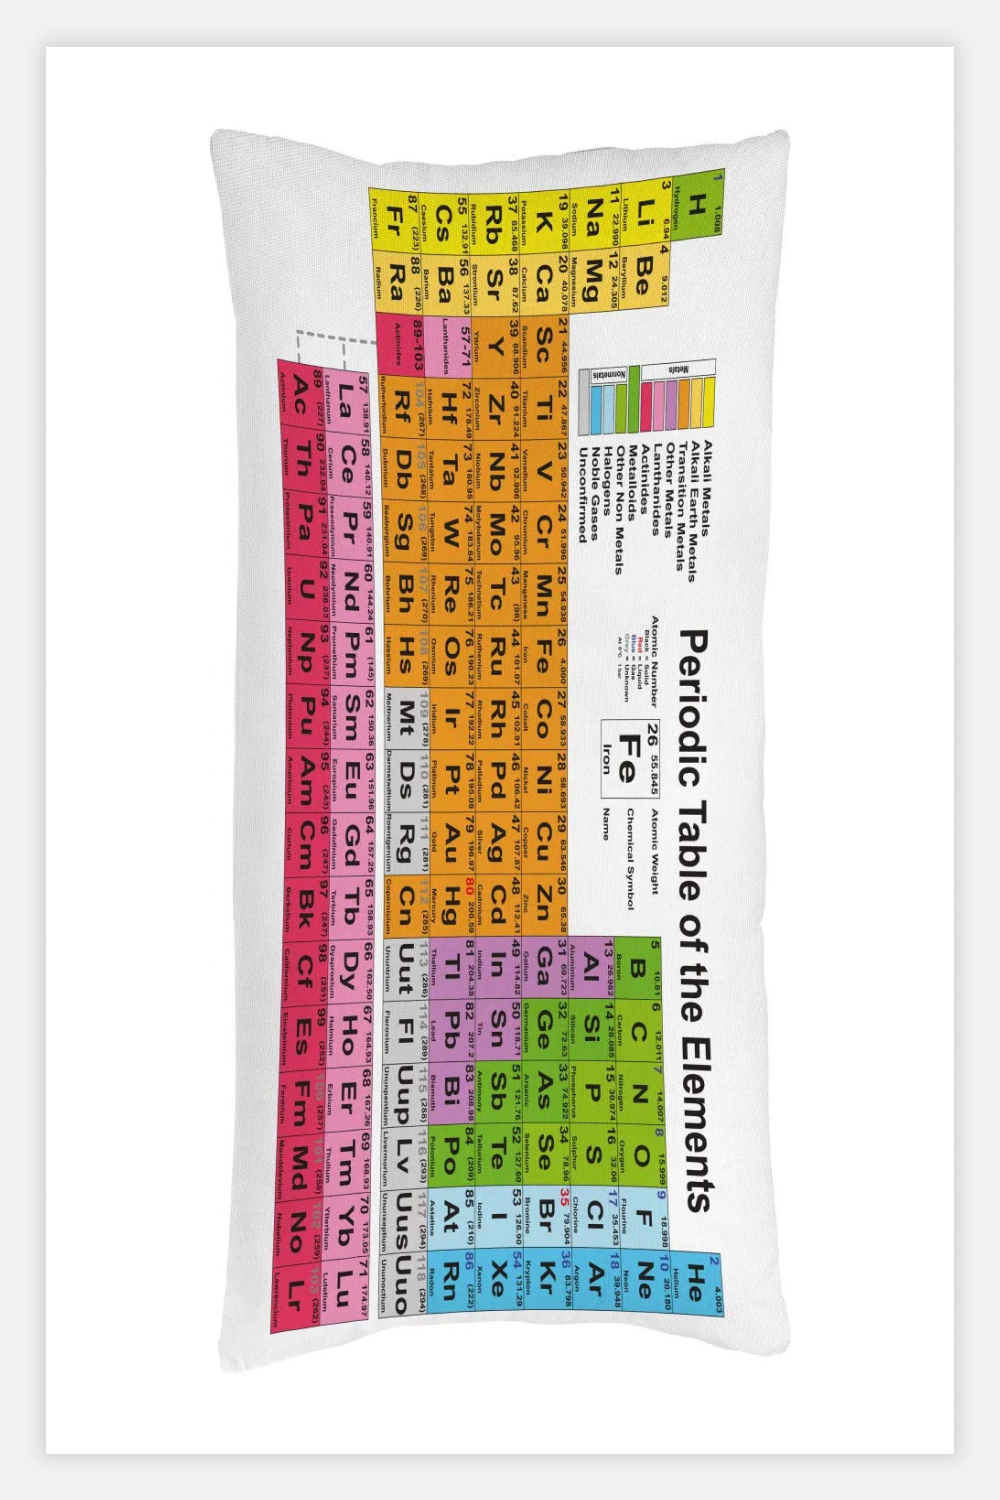 Ambesonne Periodic Table Throw Pillow Cushion Cover.